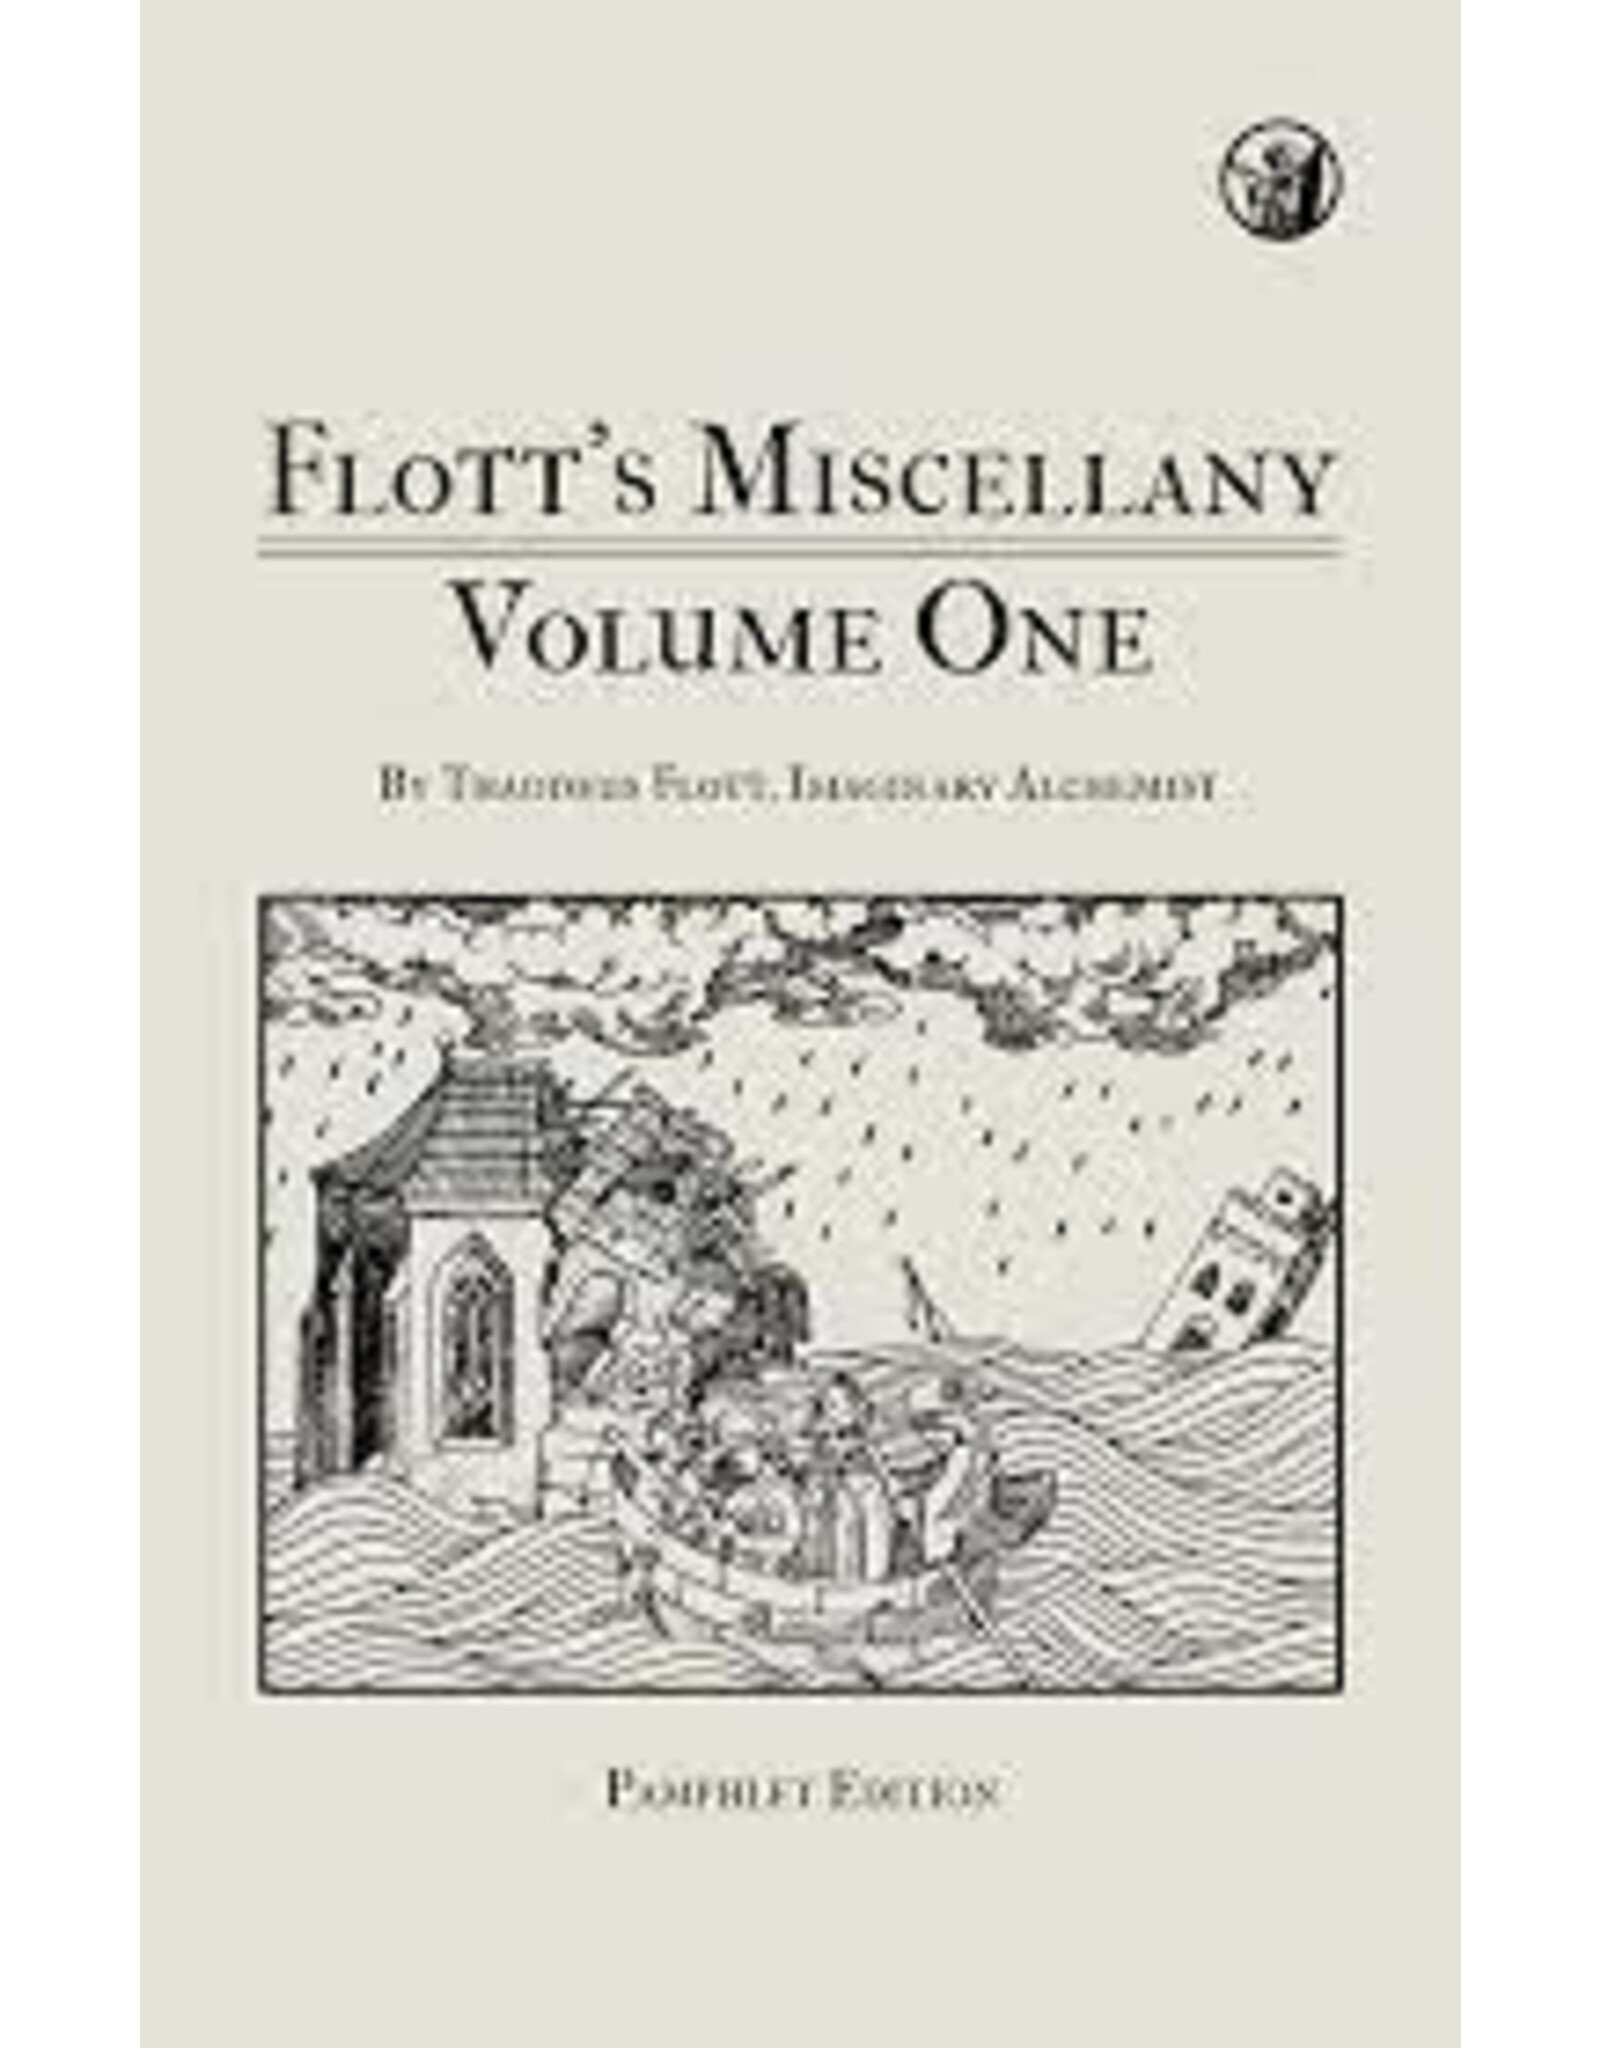 Indie Press Revolution Flott's Miscellany Volume One - Pamphlet Edition